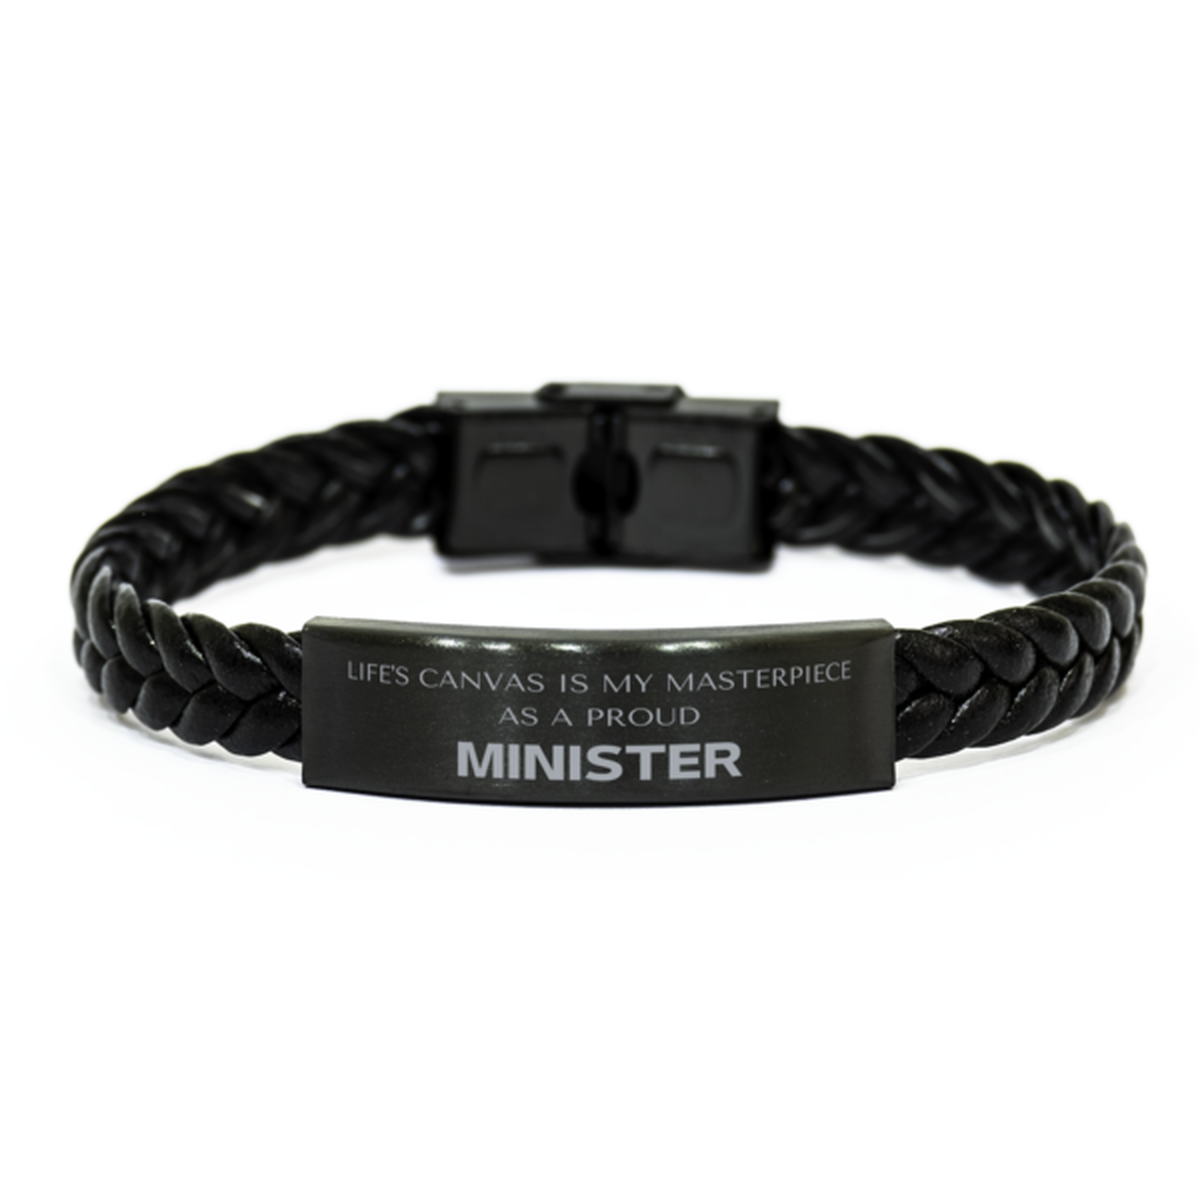 Proud Minister Gifts, Life's canvas is my masterpiece, Epic Birthday Christmas Unique Braided Leather Bracelet For Minister, Coworkers, Men, Women, Friends